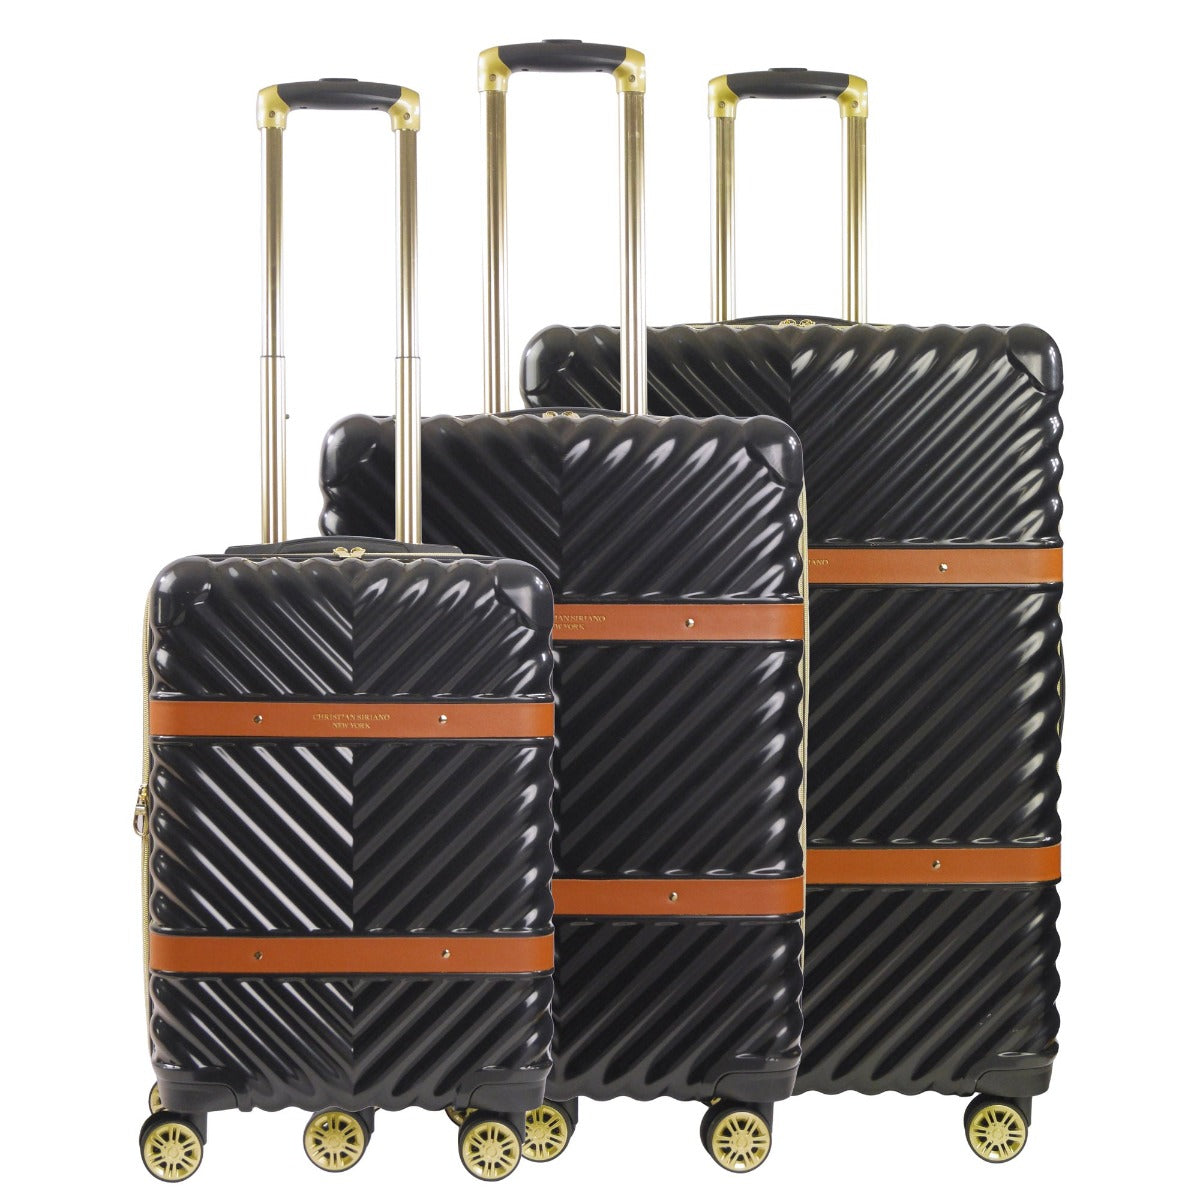 Christian Siriano New York Stella hardside spinner 3 piece suitcase set black - best durable luggage sets for travelling